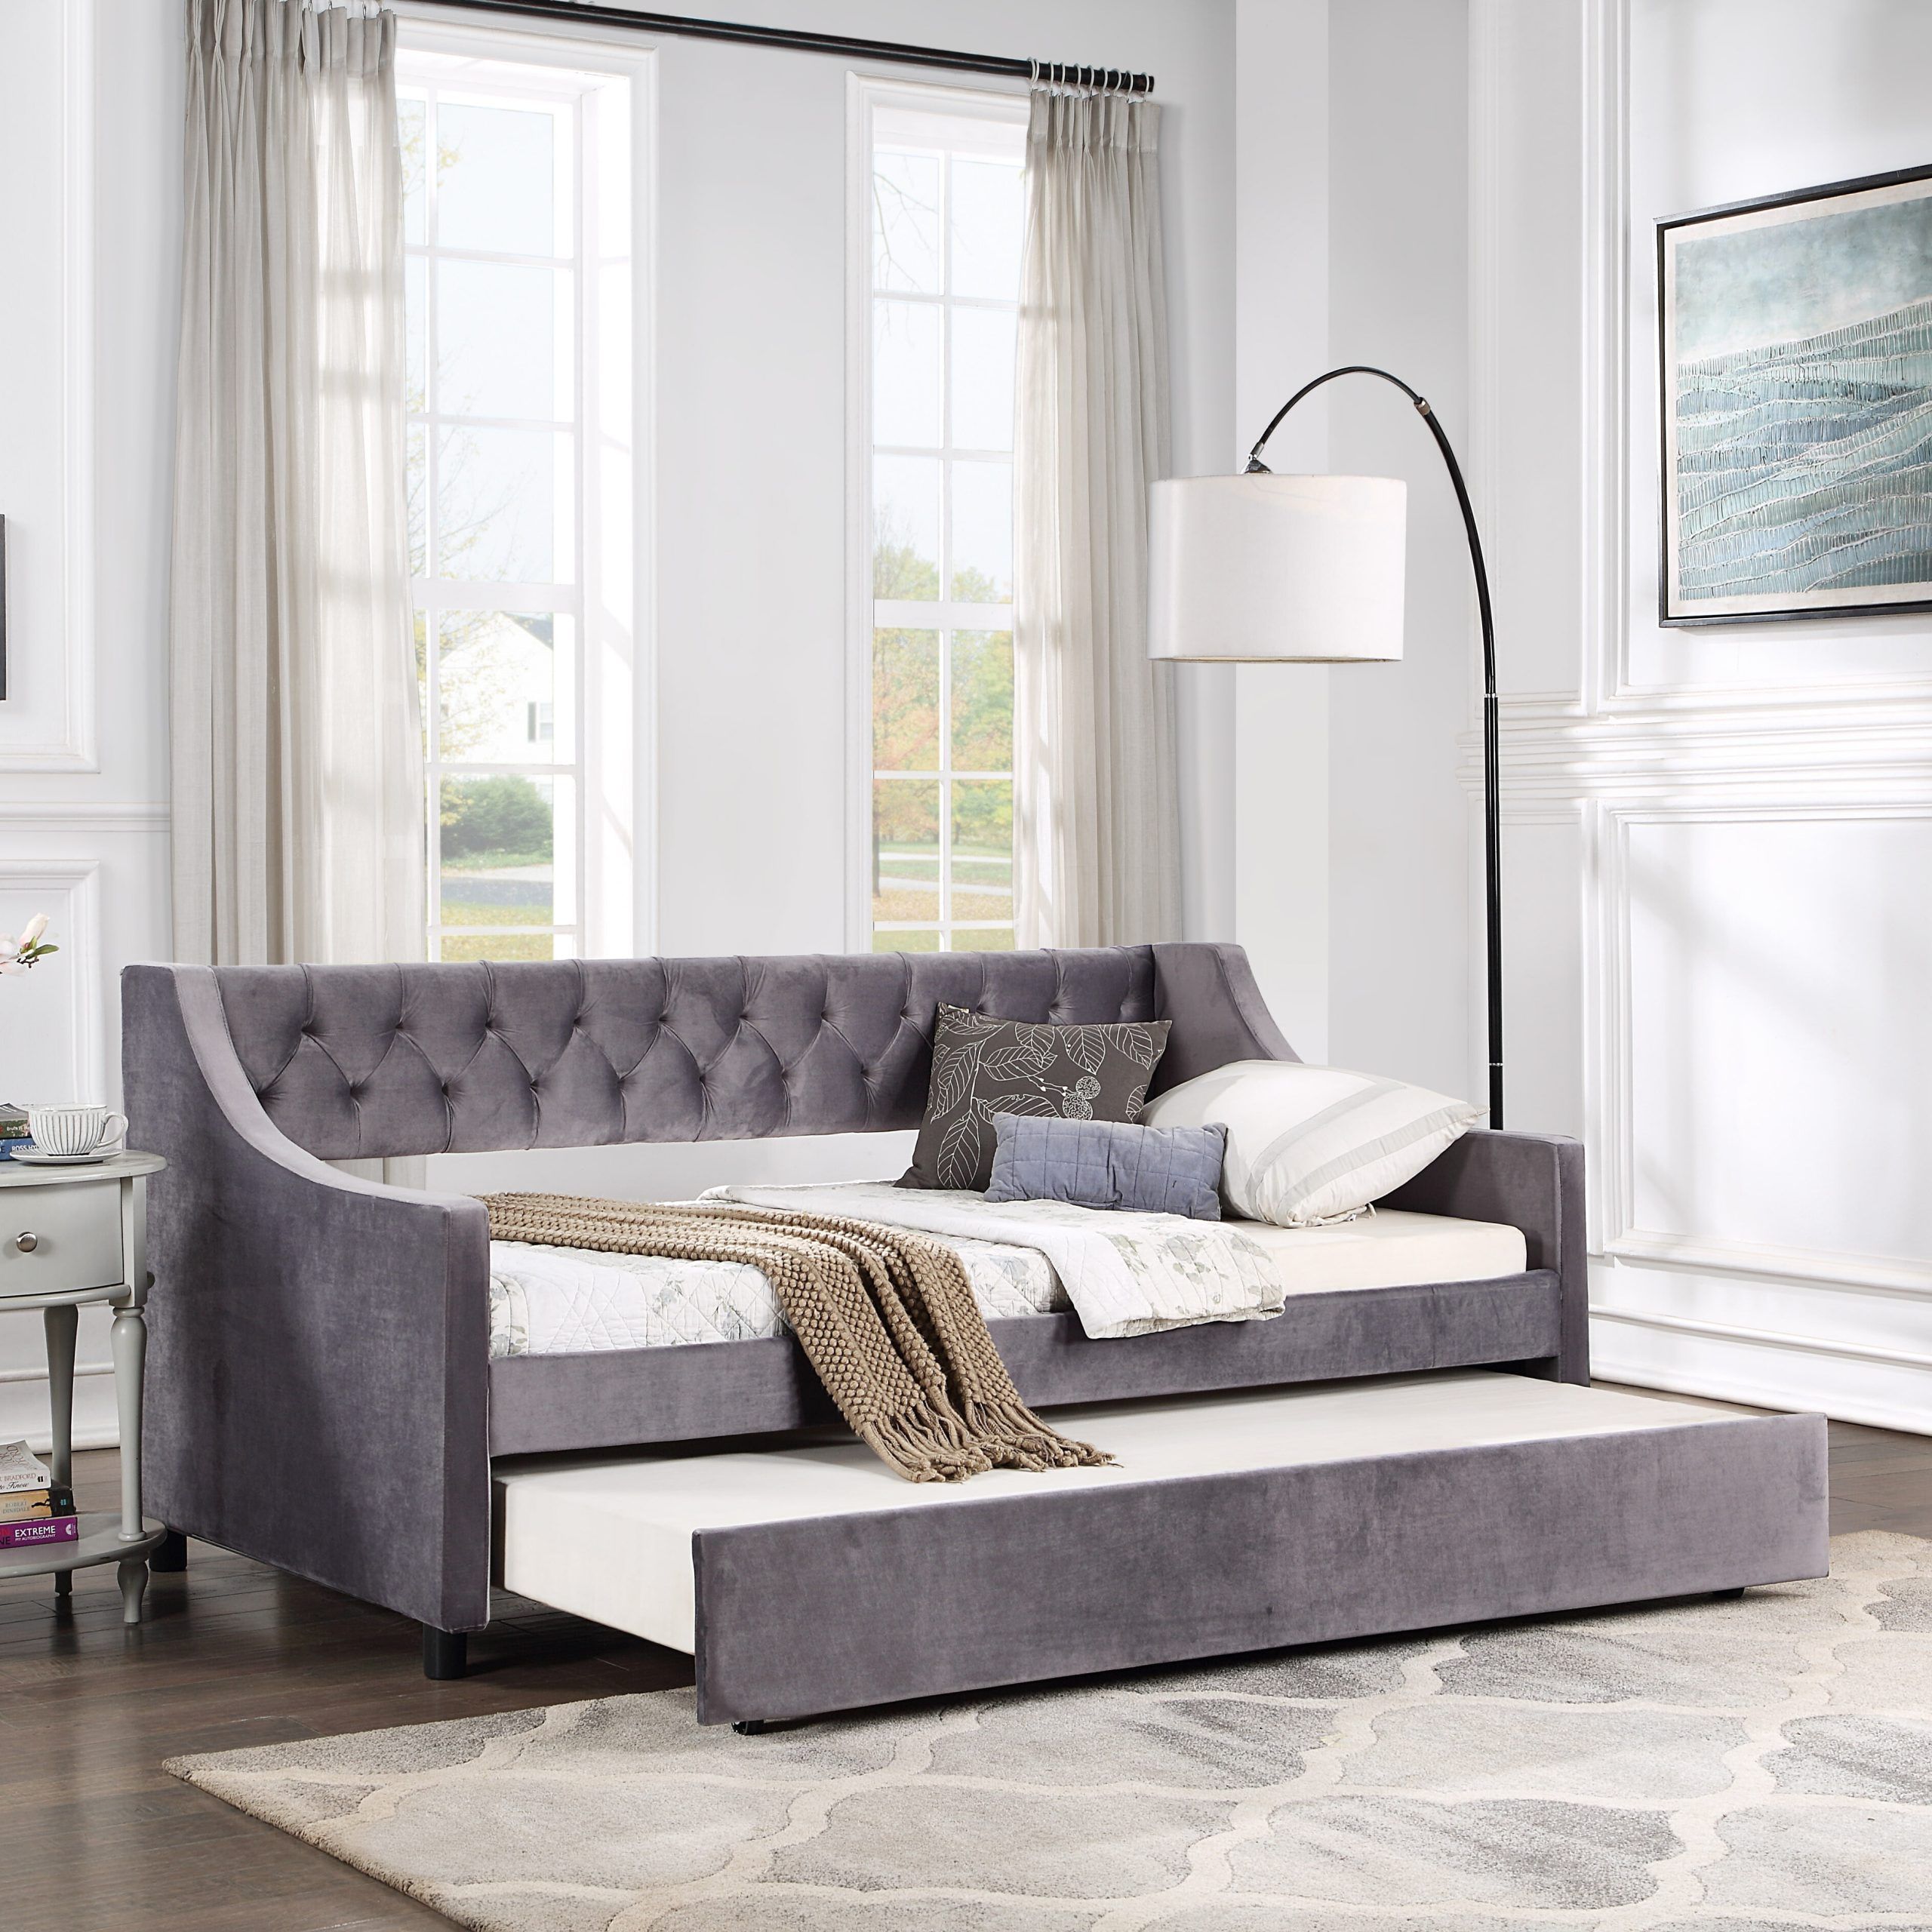 Overdrive Pull Out Sofa Bed With Upholstered Tufted Daybed Sleeper Sofa With 2 In 1 Gray Pull Out Sofa Beds (Gallery 2 of 20)